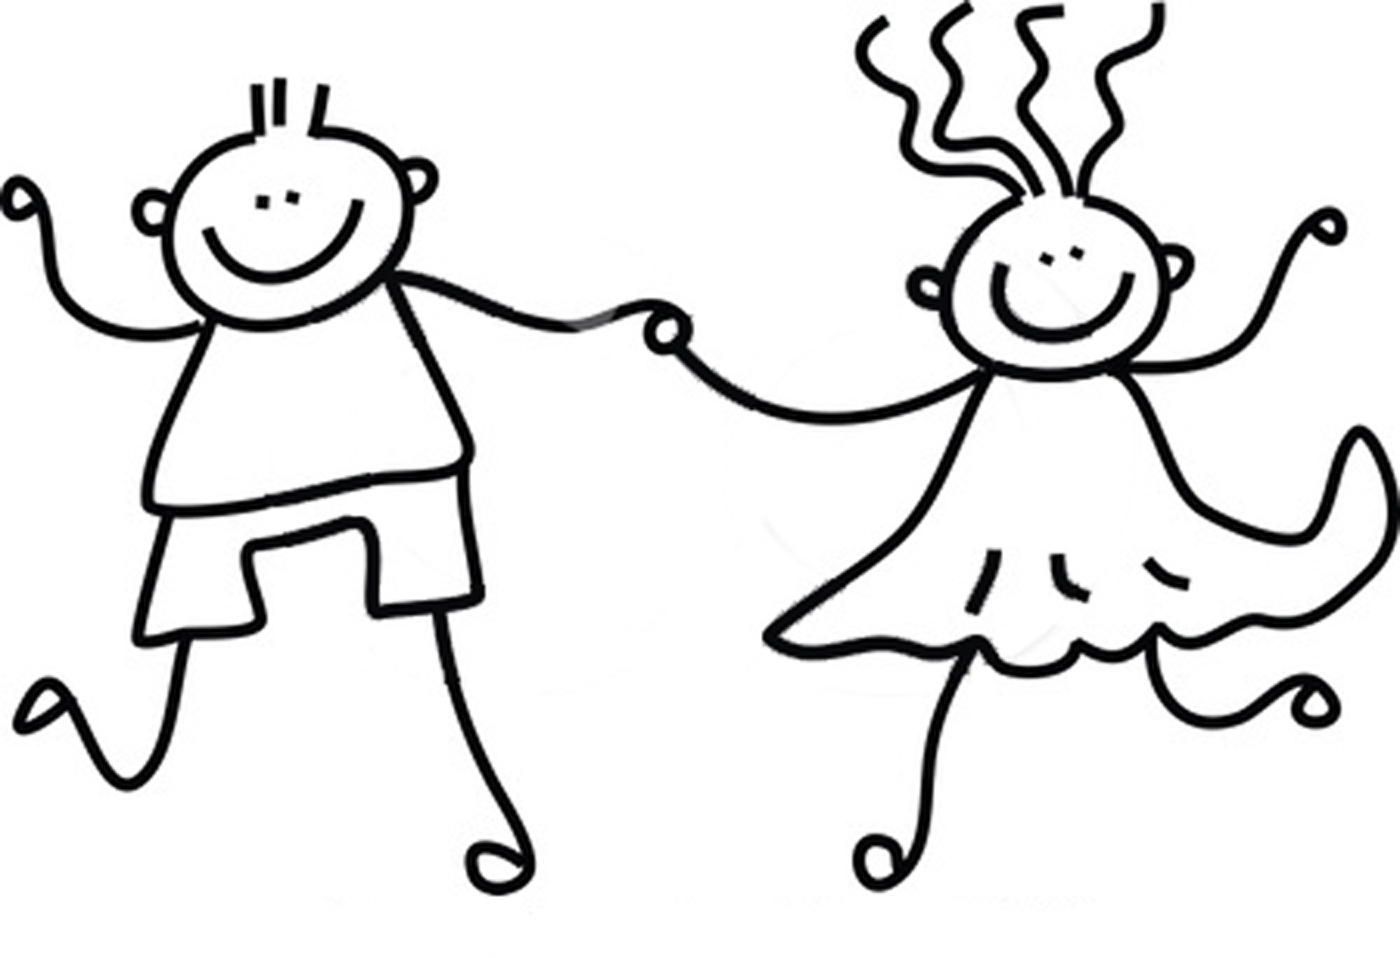 People Holding Hands Clipart Black And White Images  Pictures - Becuo